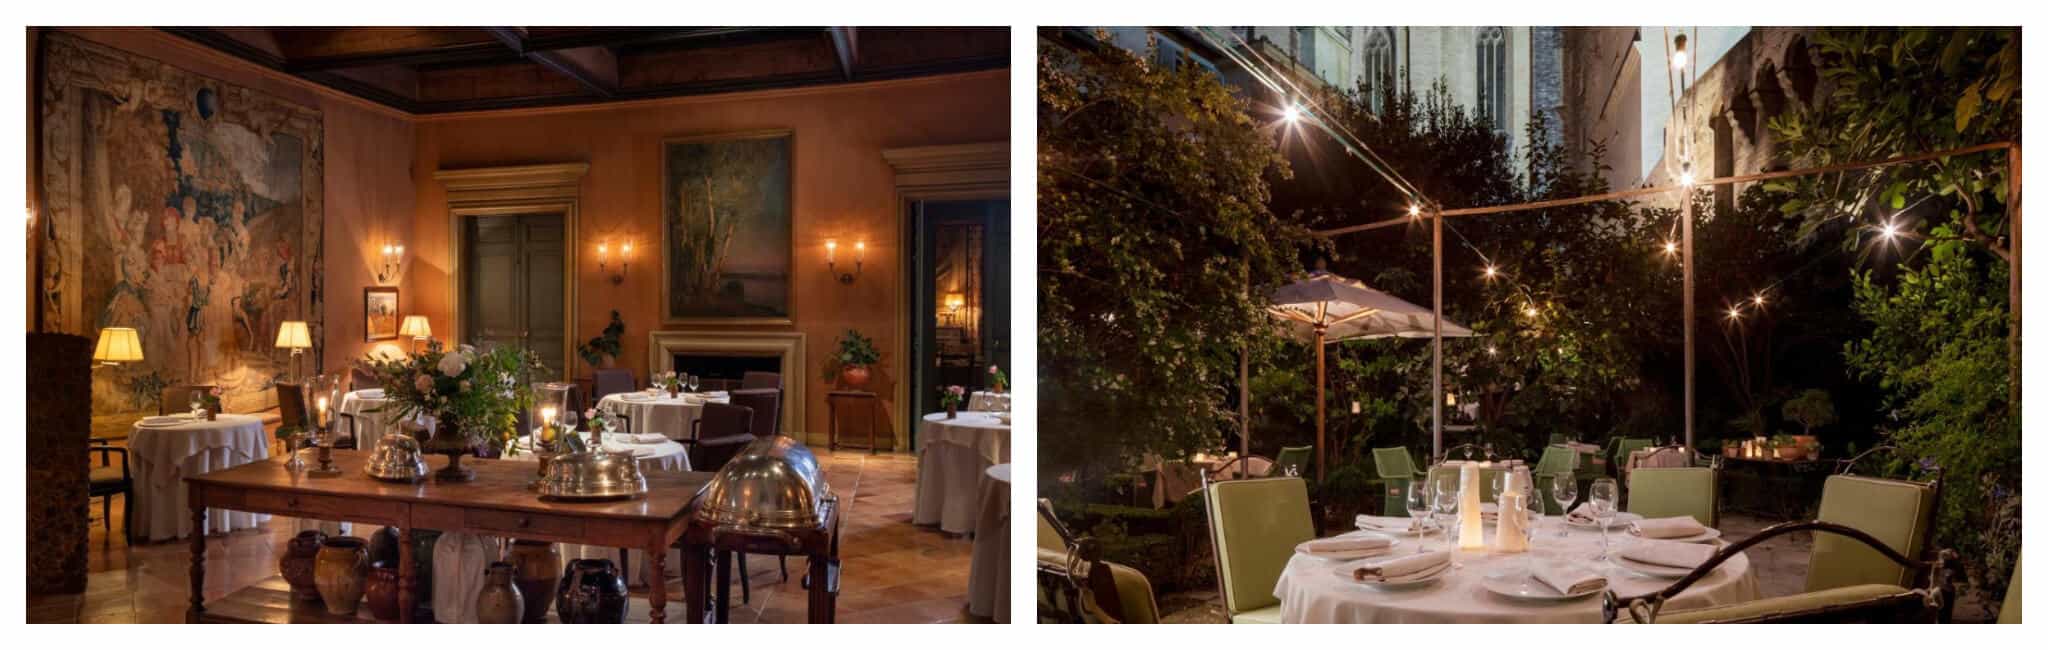 Left: La Mirande Avignon's main restaurant, with its cozy interiors and lighting, has a table with multiple silver serving dishes and hoods prepared to meet guests Right: On the terrace in La Mirande Avignon, guests are surrounded by greenery and cozy lighting, with green chairs and views of the Palais des Papes.